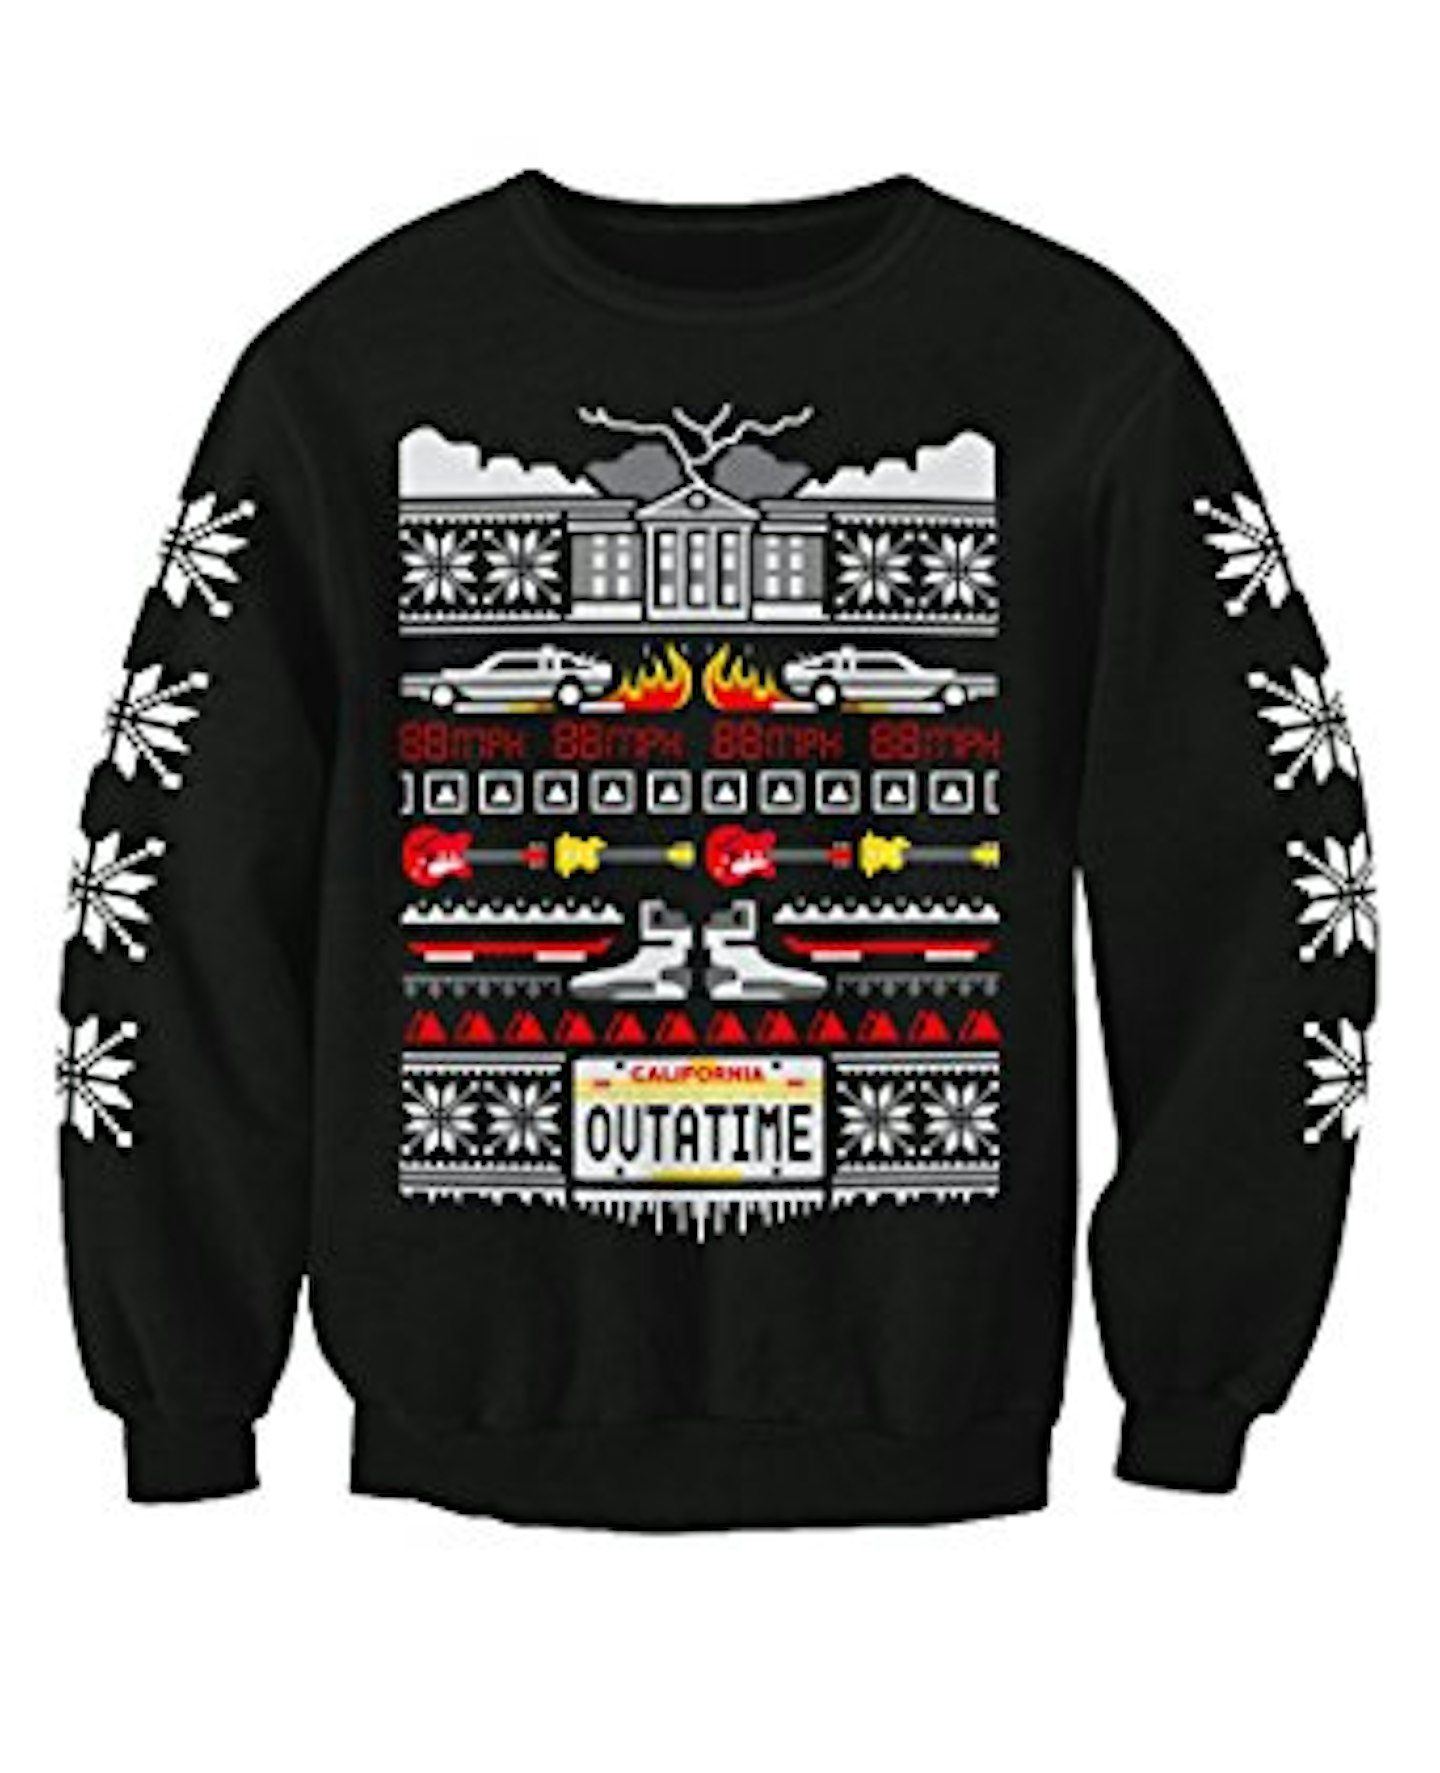 Back to the future Christmas jumper